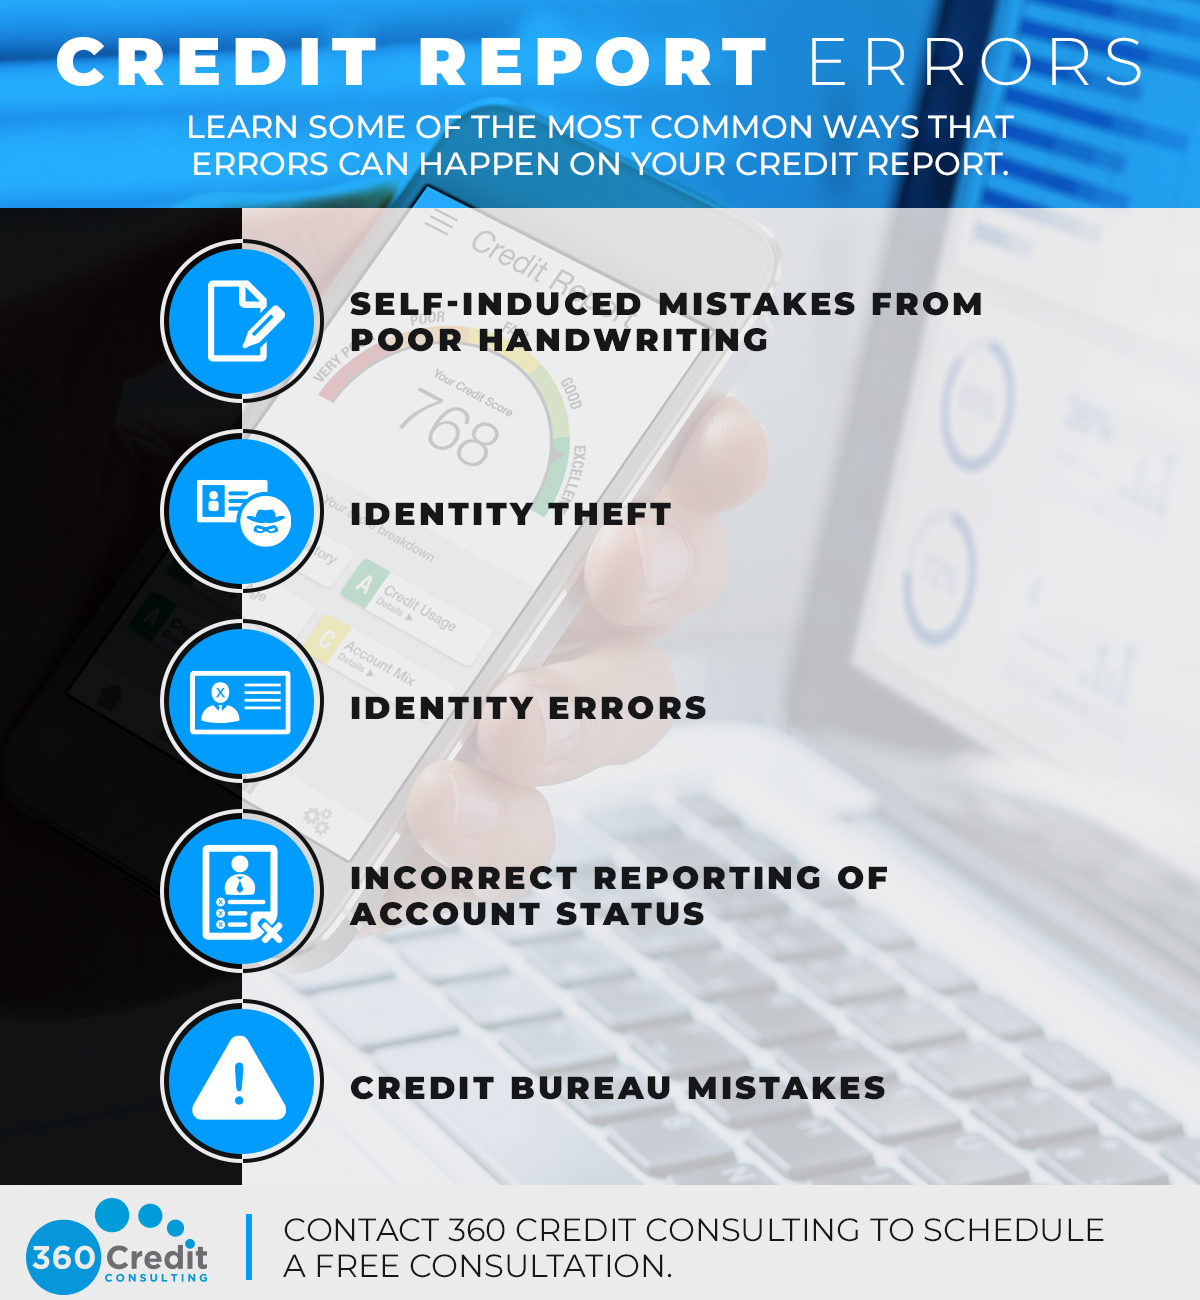 Are Errors On A Credit Report Easy To Fix?